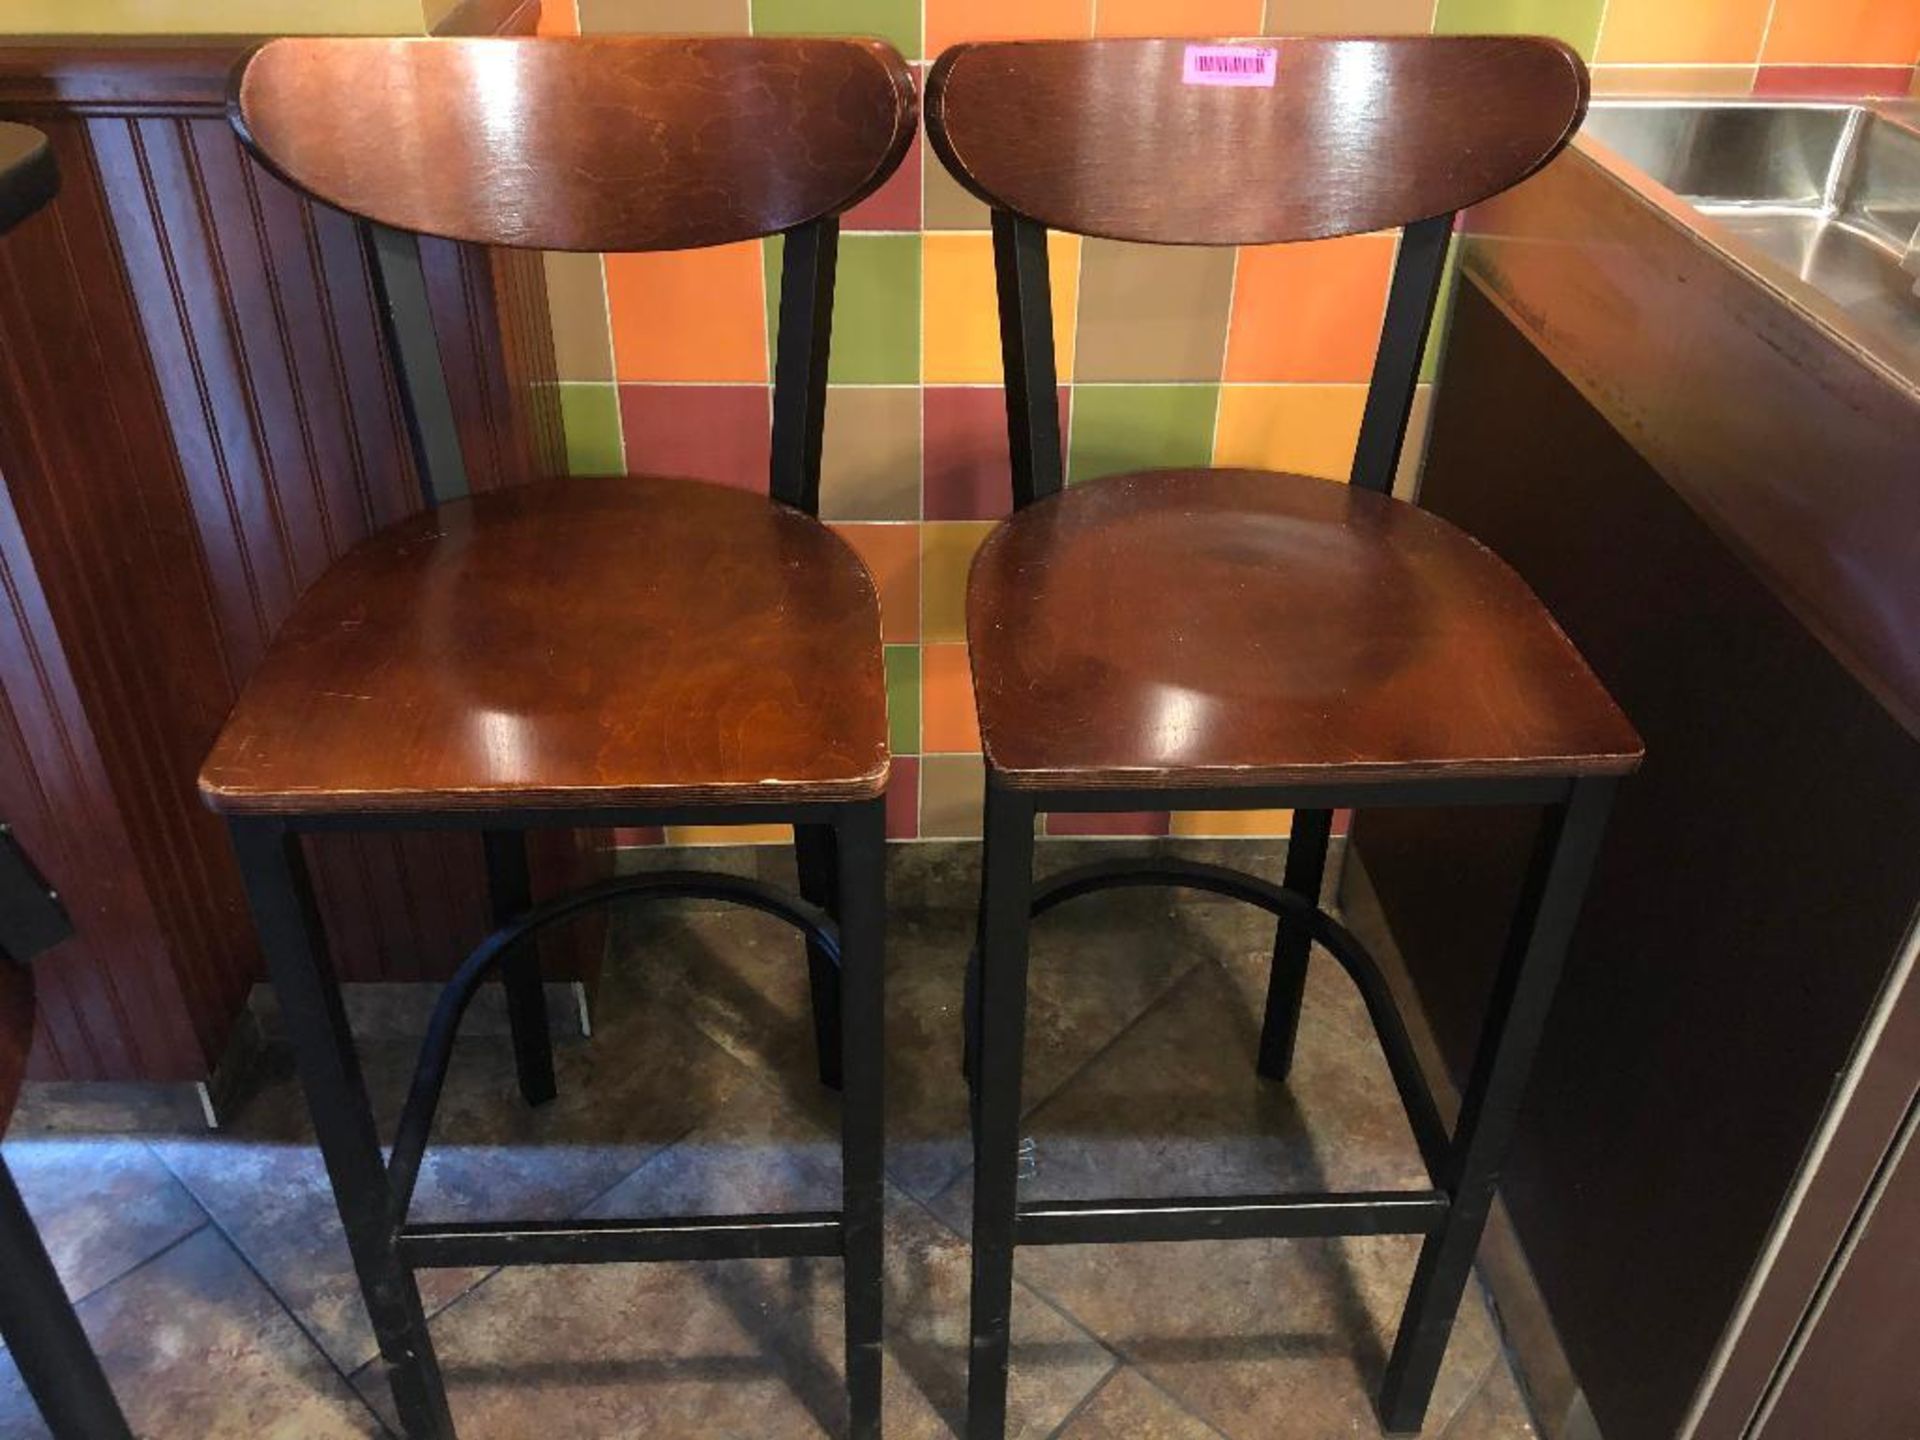 DESCRIPTION: (2) 30" METAL FRAMED BAR STOOLS W/ WOODEN SEATS BRAND / MODEL: WALSH AND SIMMONS SIZE: - Image 2 of 3